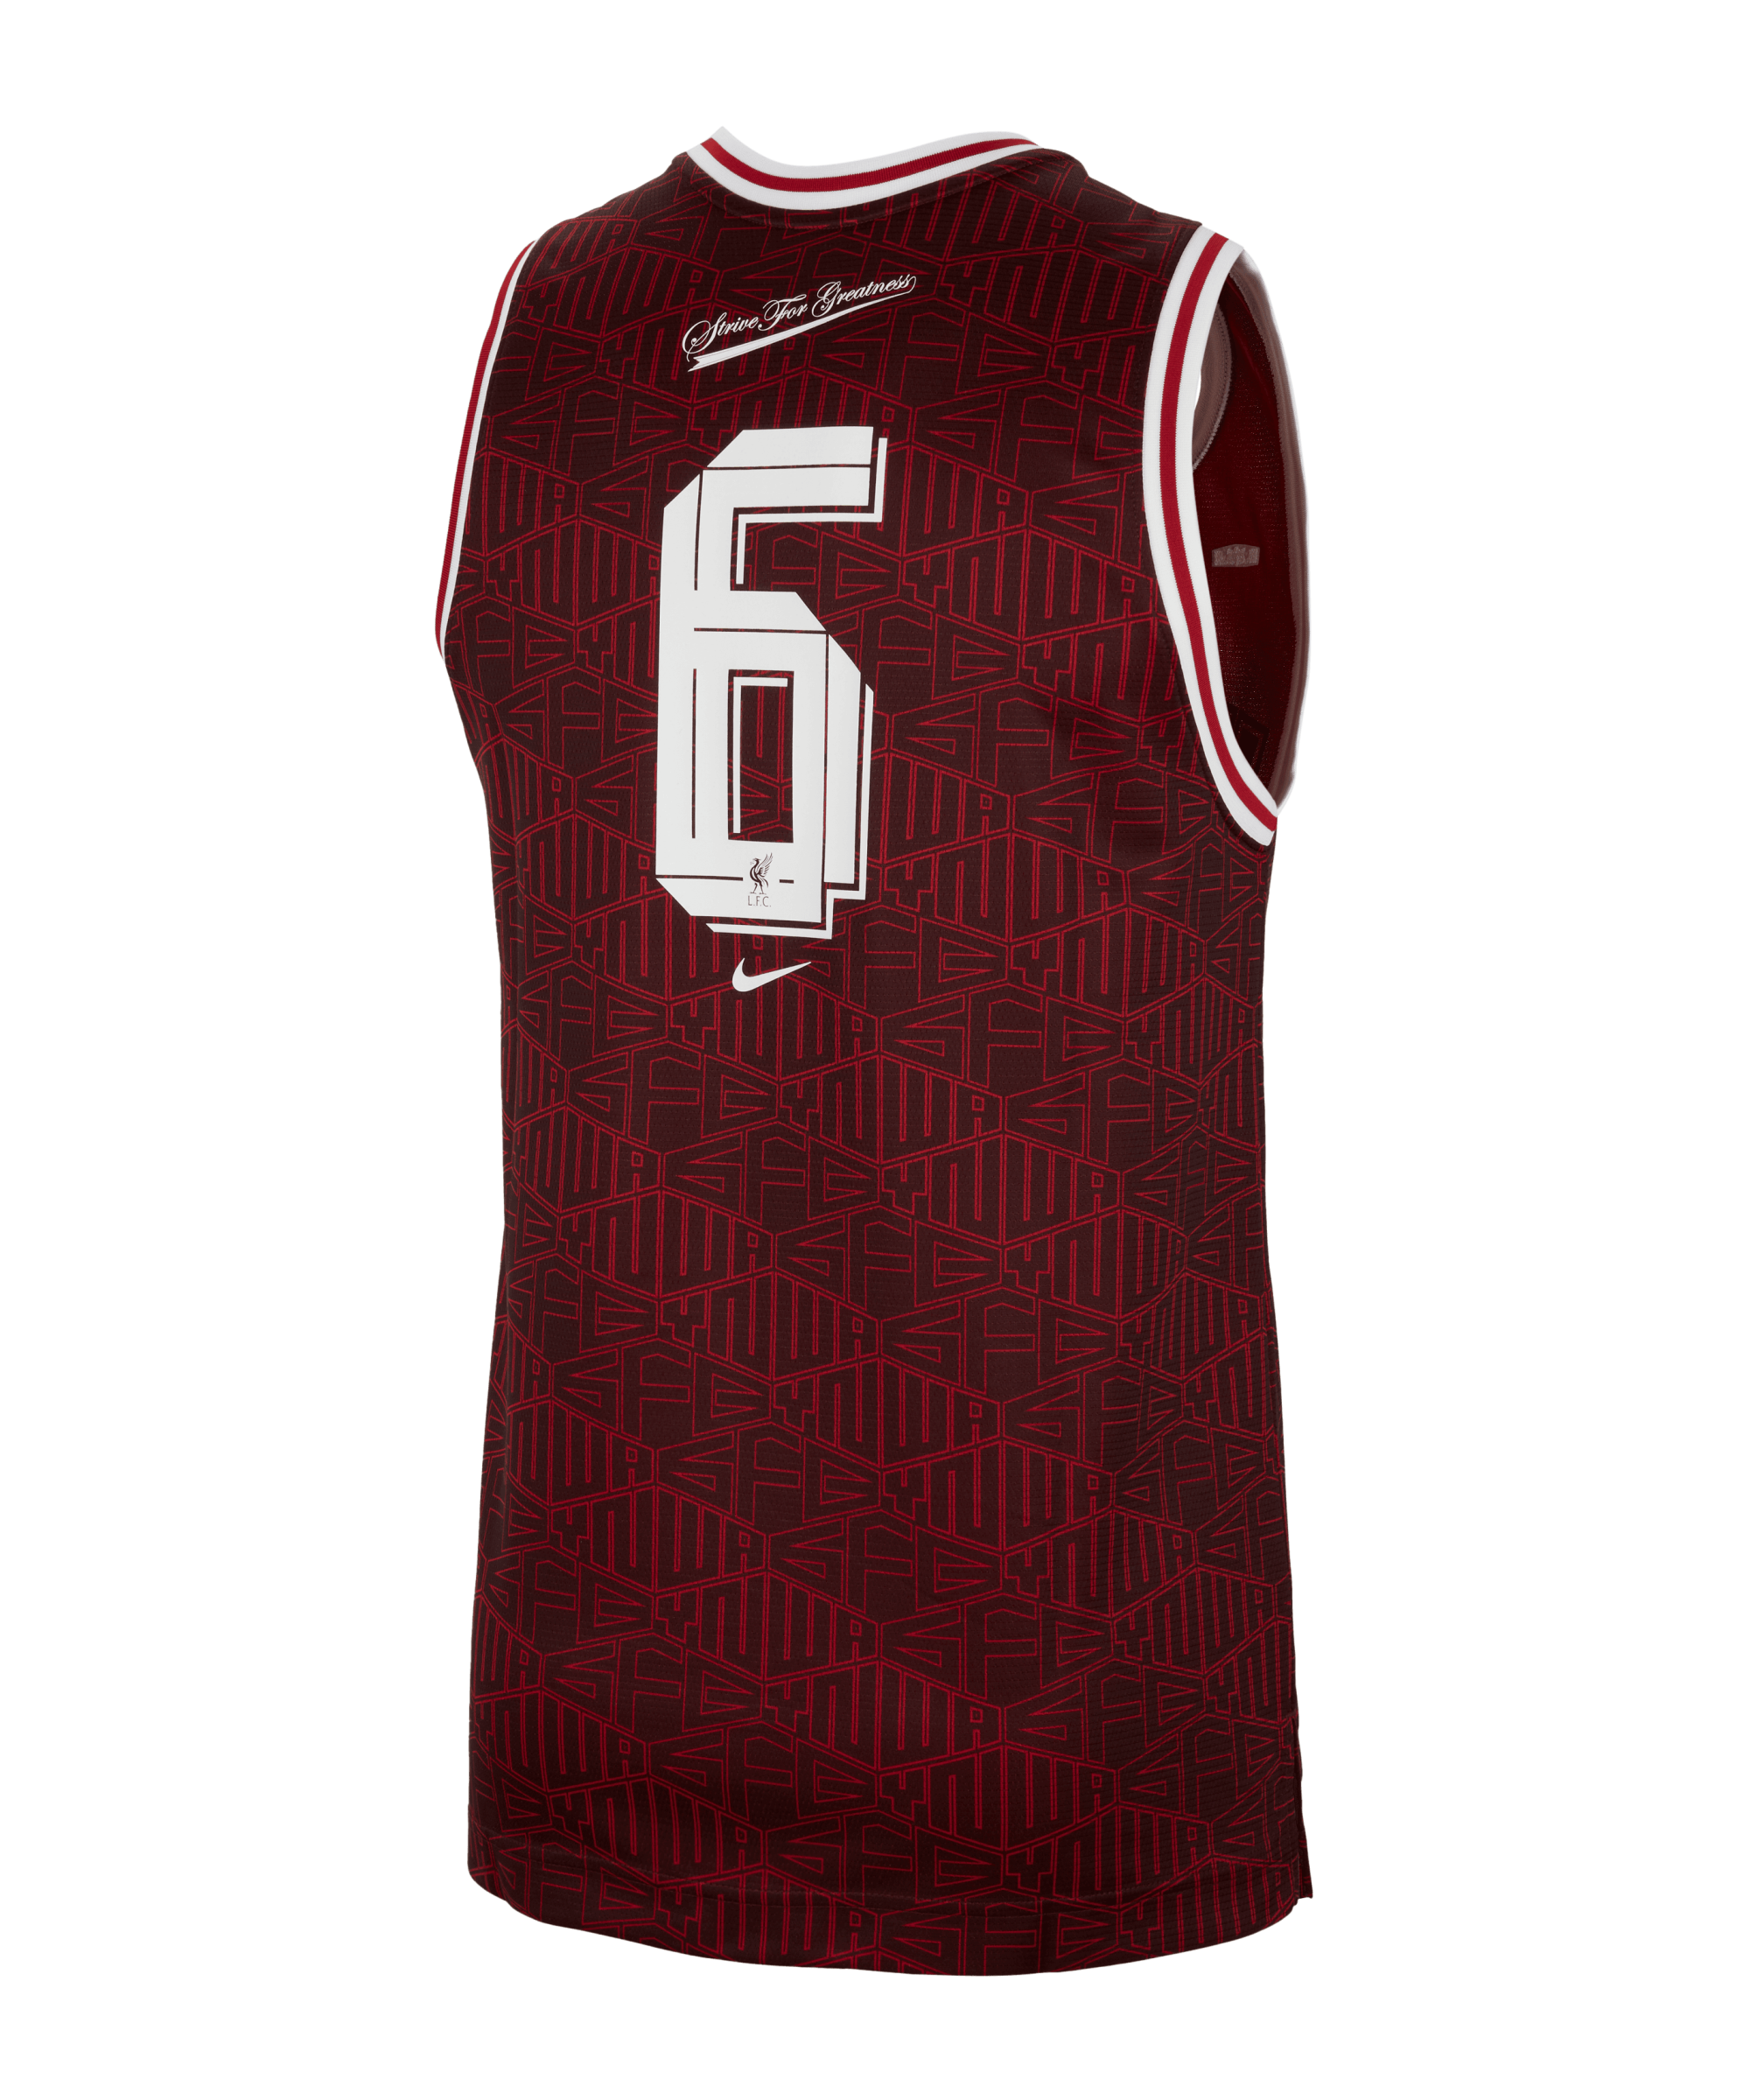 Liverpool FC x LeBron James Official Imagery